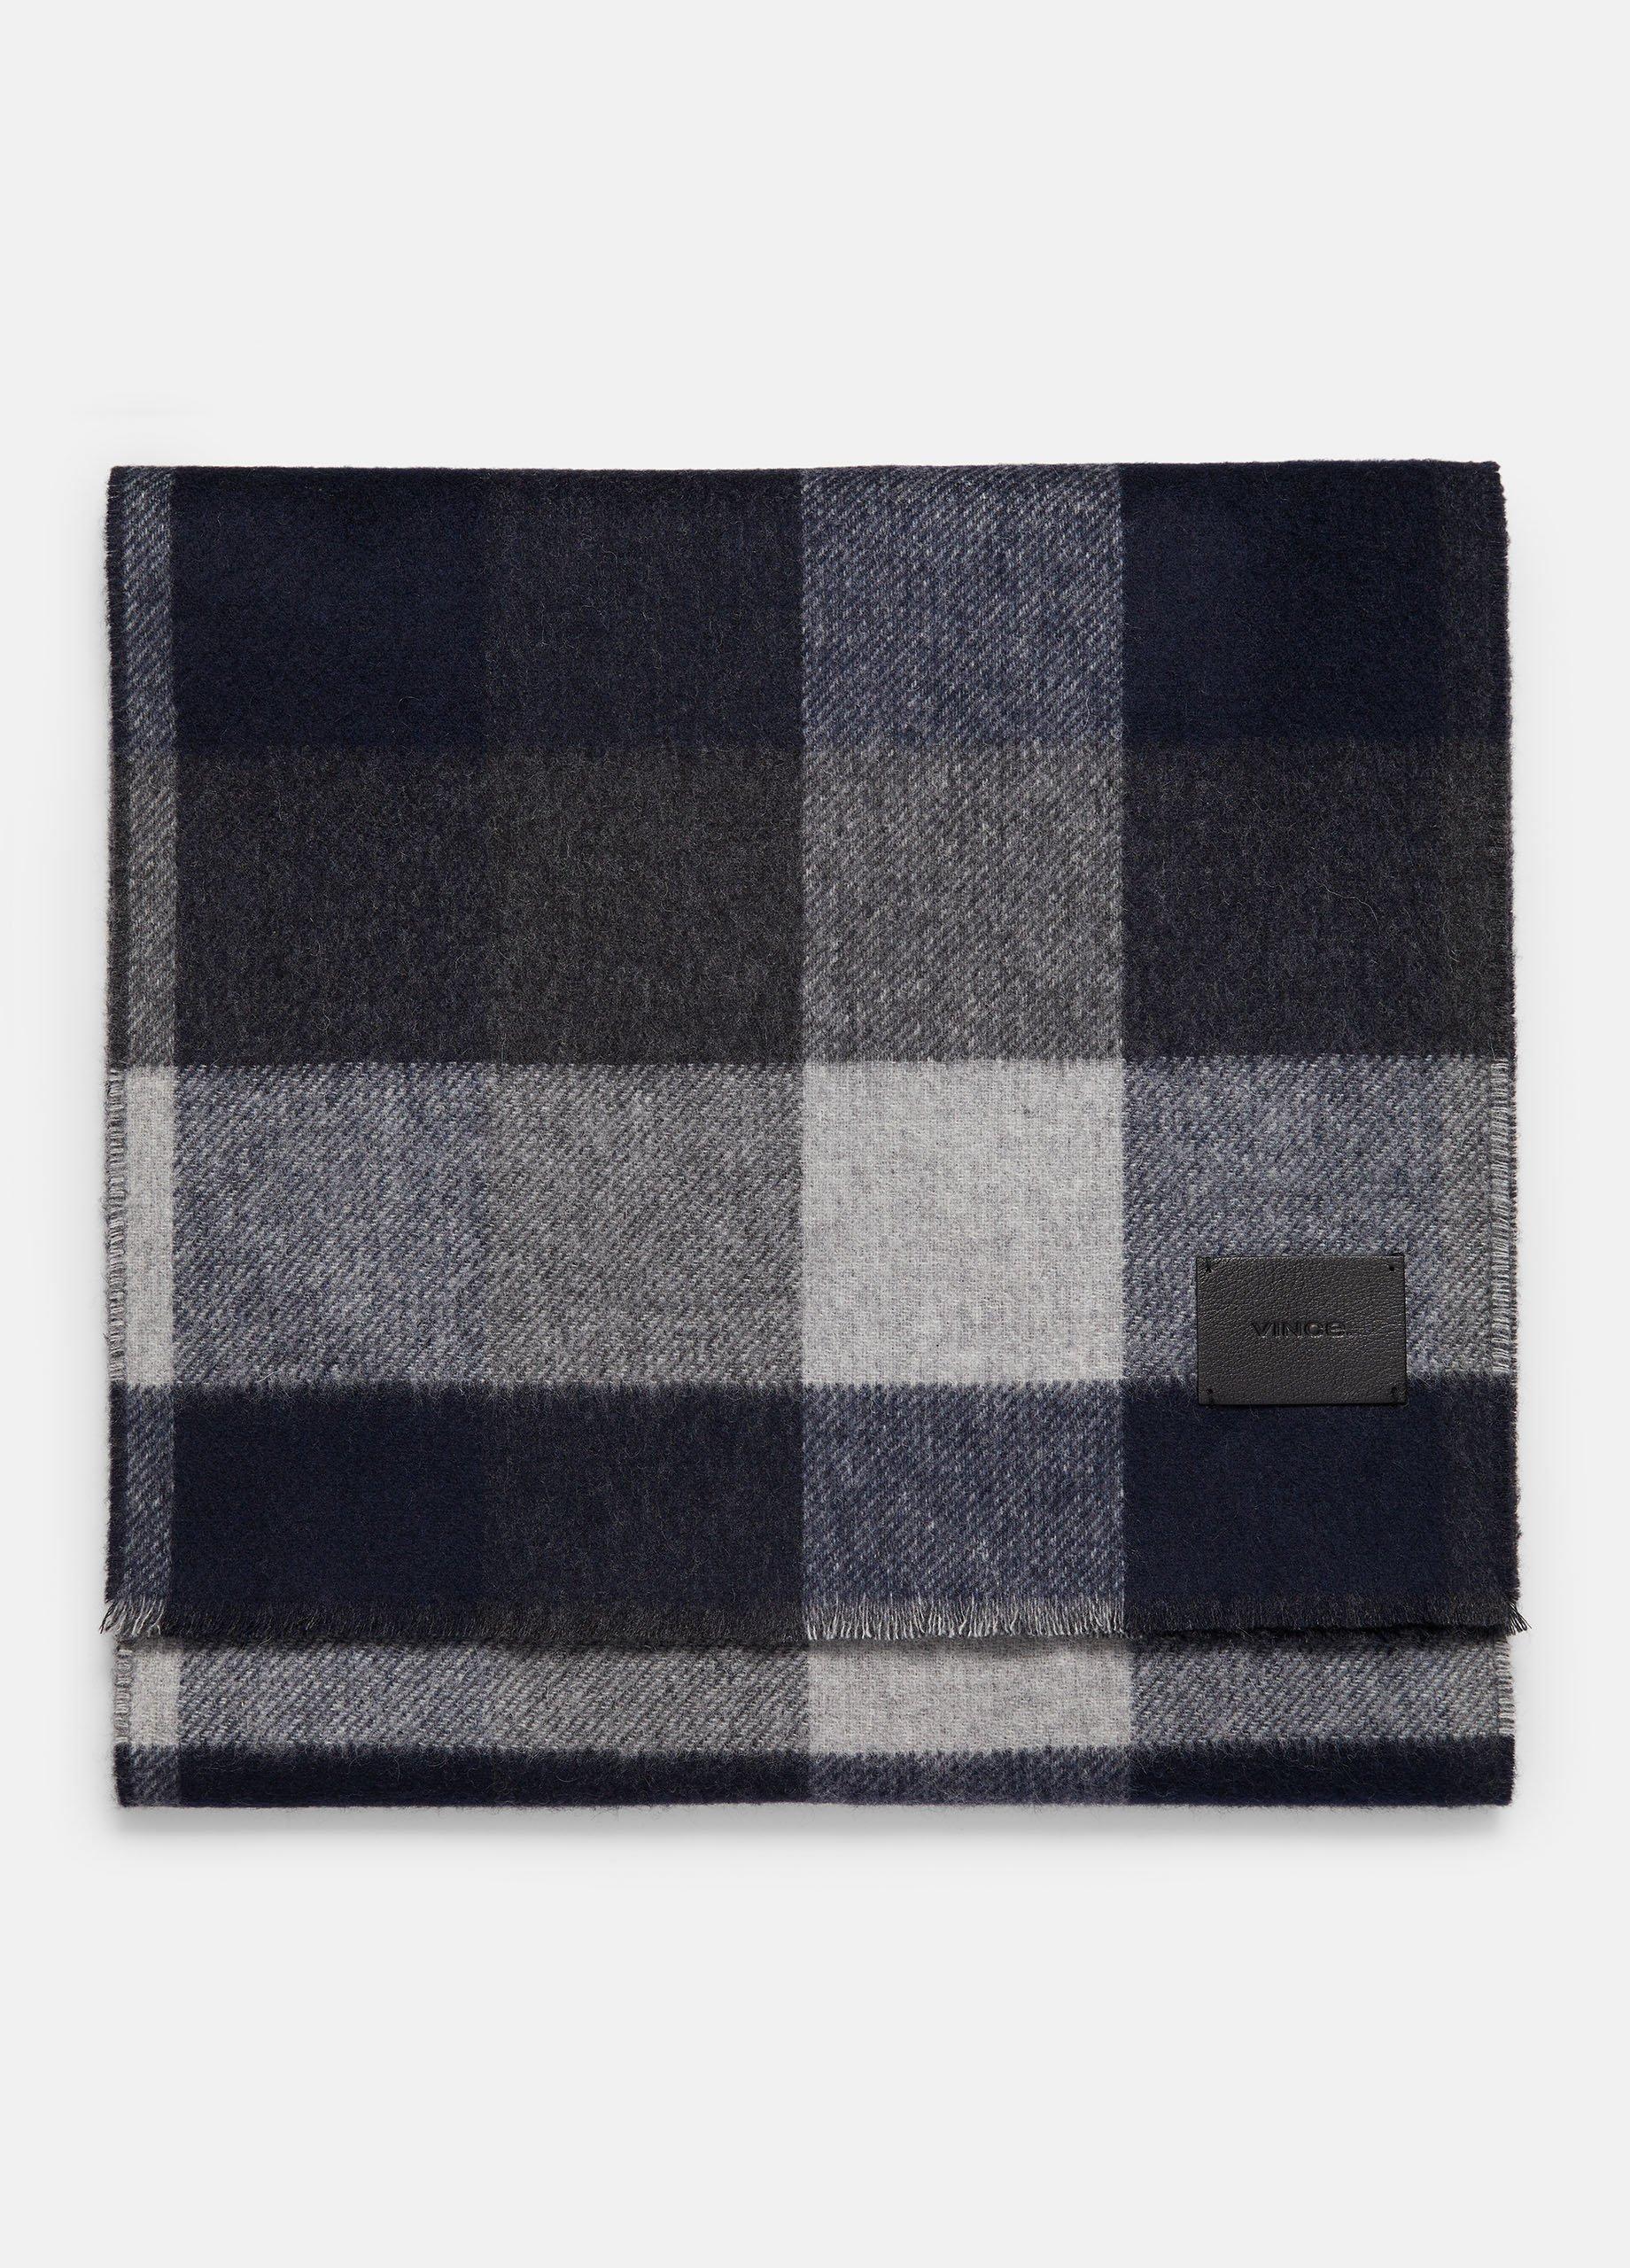 Stafford Plaid Wool And Cashmere Double-Face Scarf, Black Coastal Blue Vince